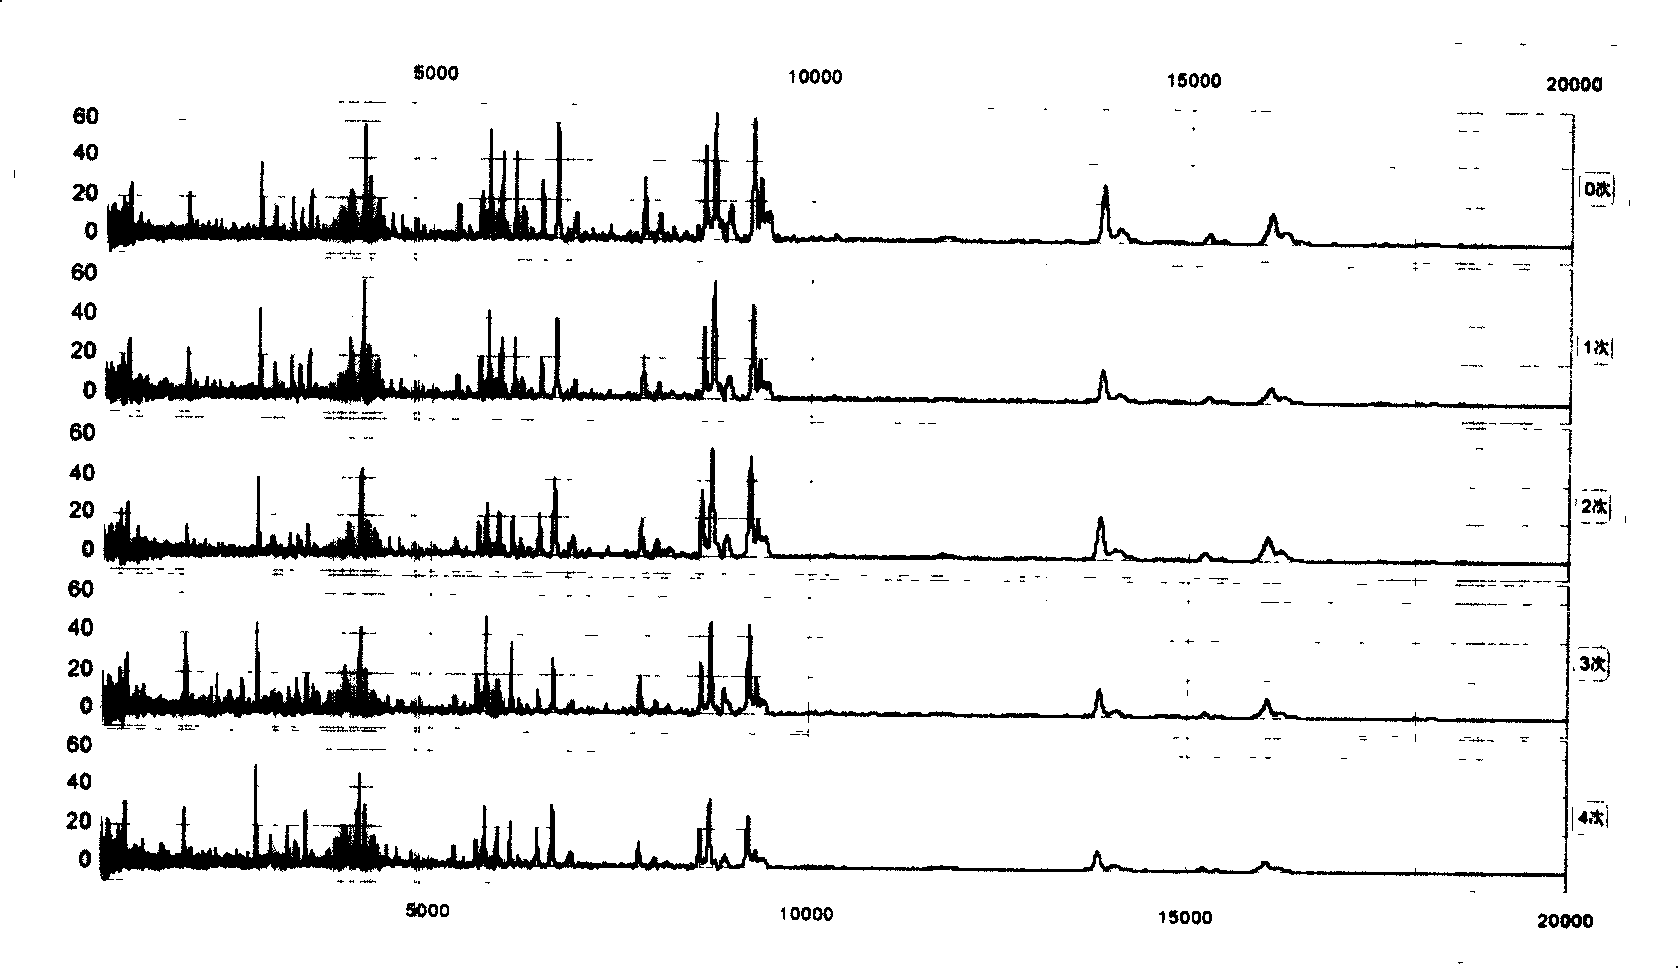 Standard reagent kit for mass spectrometry clinical diagnosis and the method